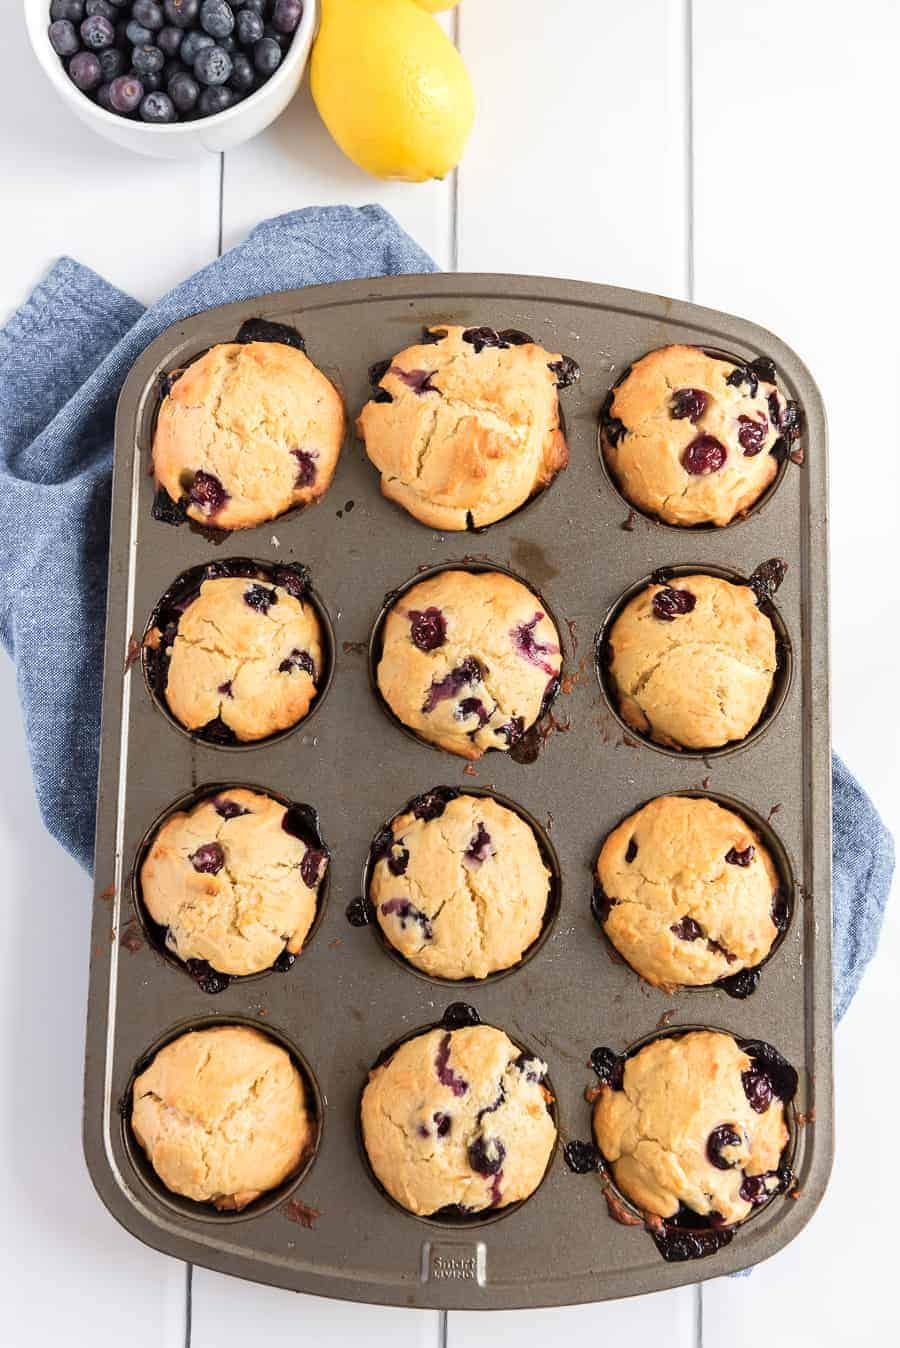 How To Make Blueberry Lemon Muffins